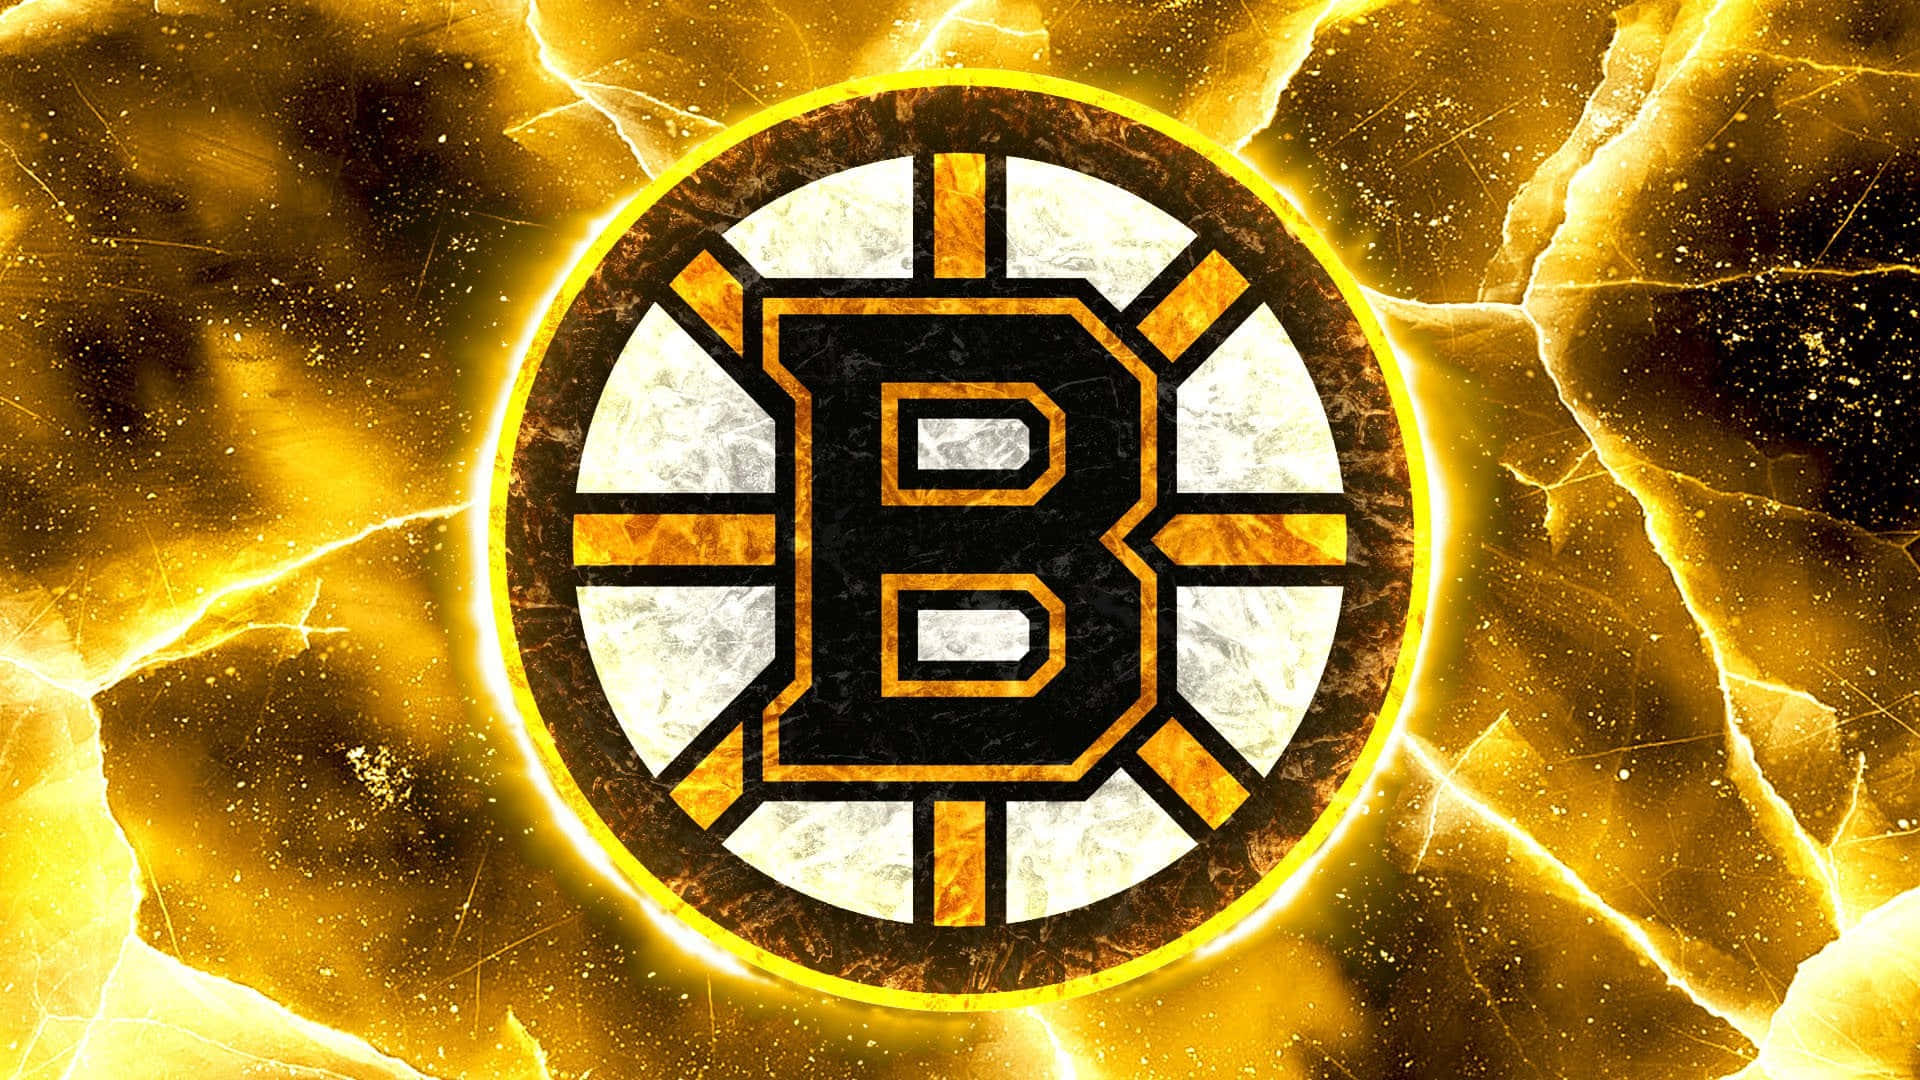 The Boston Bruins are passionate about the game